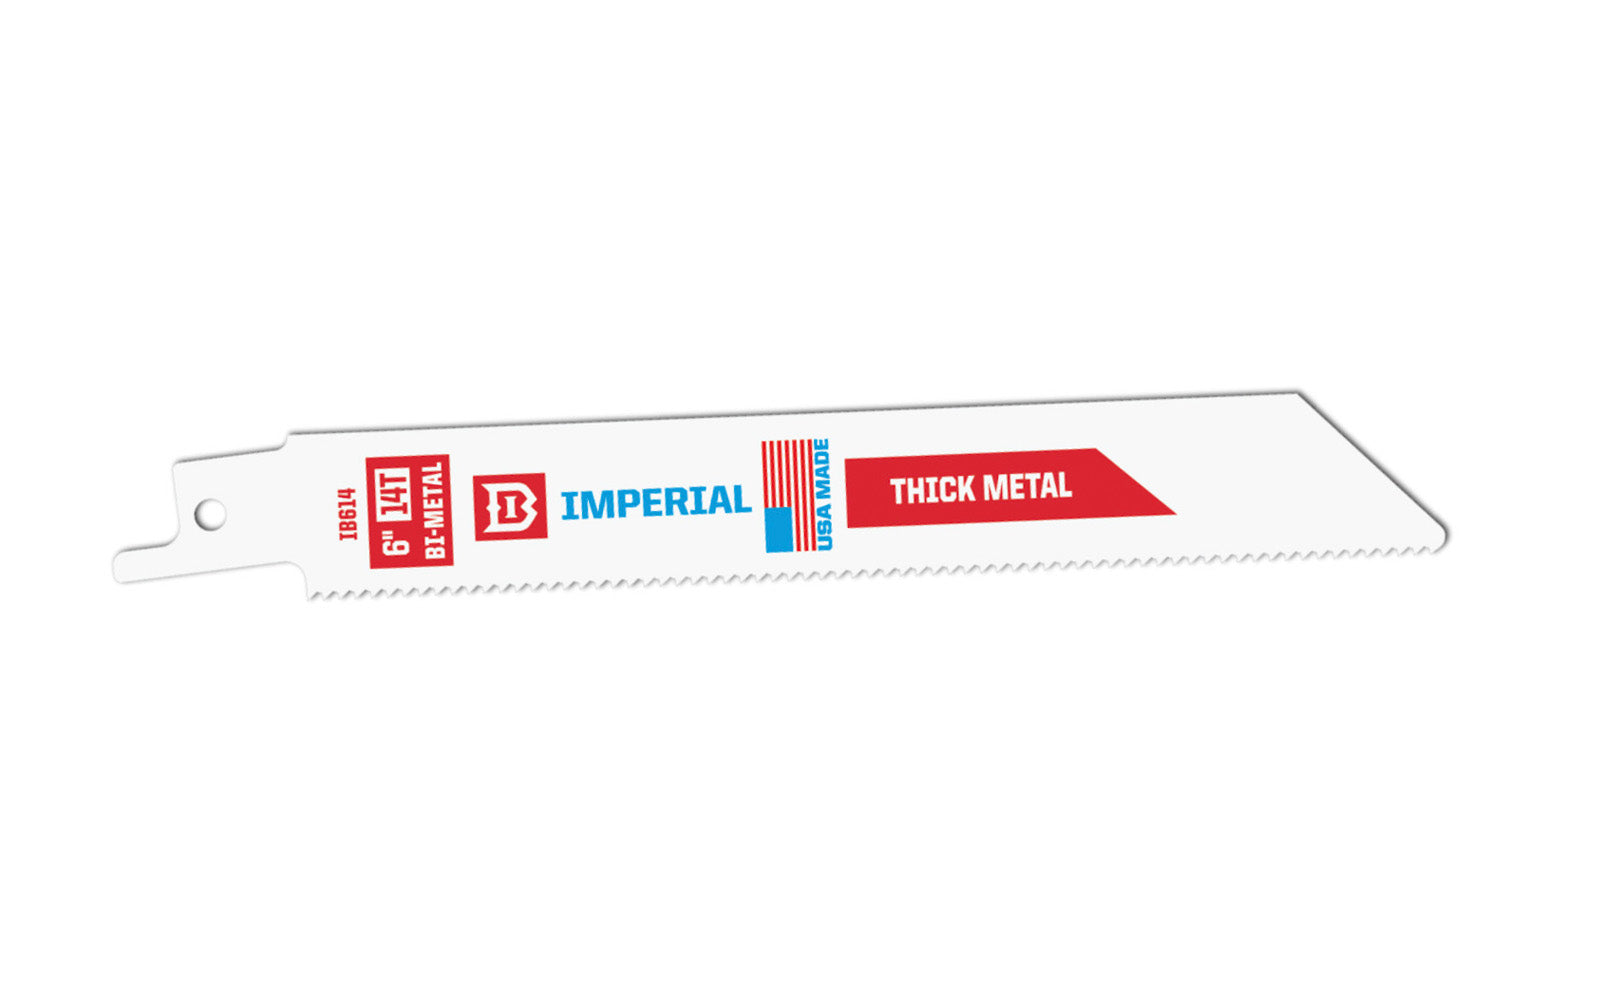 Imperial Blades Standard 6" 14 TPI Thick Metal Reciprocating Blade. Thin .035" kerf  for fast, flexible cuts. Straight blade body for increased beam strength. Recommended applications: Thick Metal (1/4" to 7/16"), Fiber Cement. Sold as 1 blade. Model IB614-B. Bi-Metal Blade. Made in USA.   